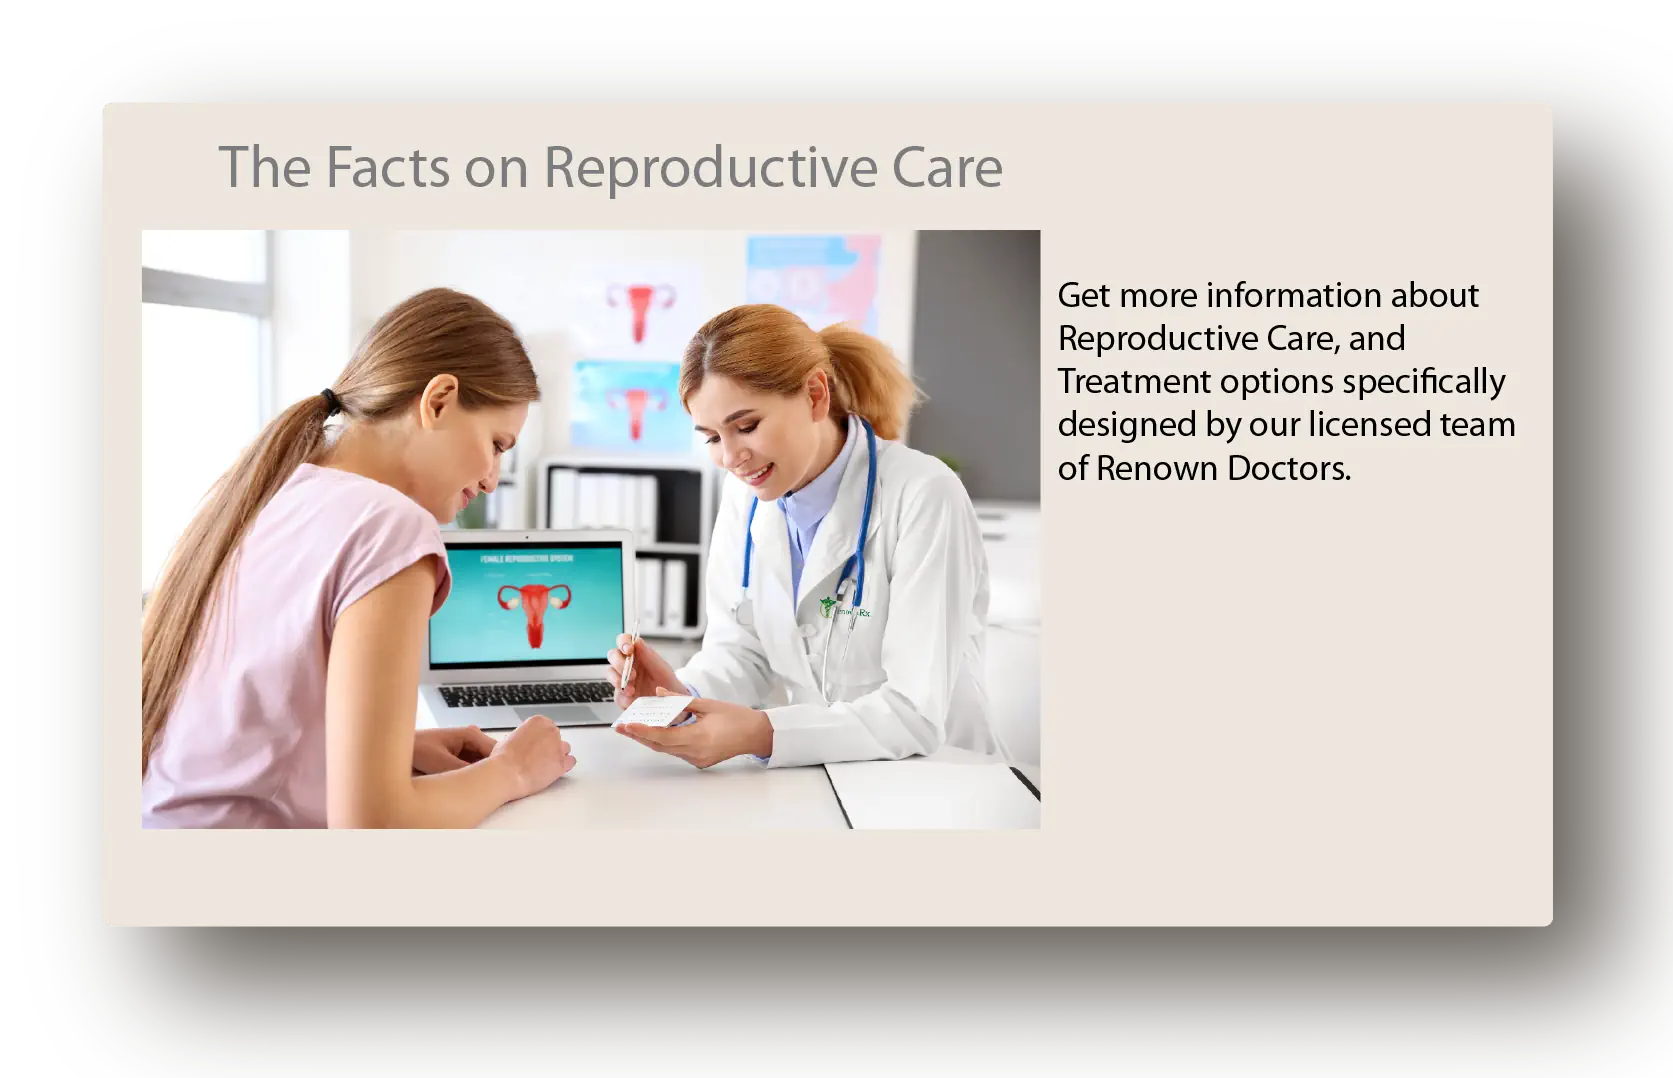 The Facts on Reproductive Care